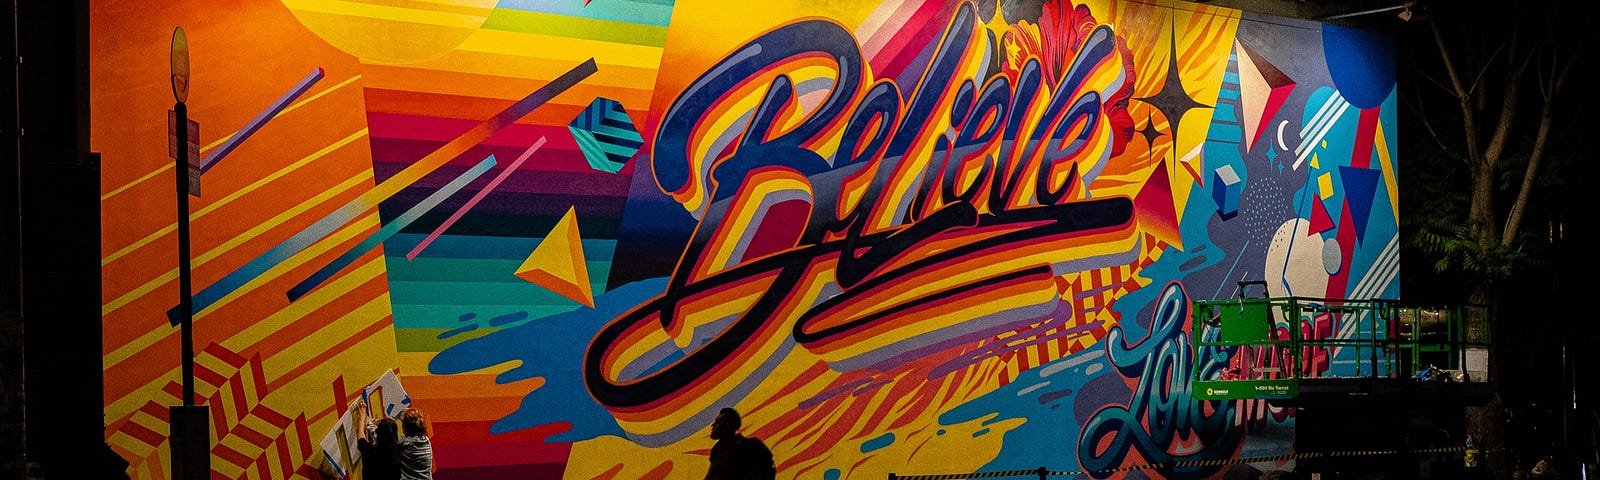 Colorful, urban mural on the street with word, “Believe”.